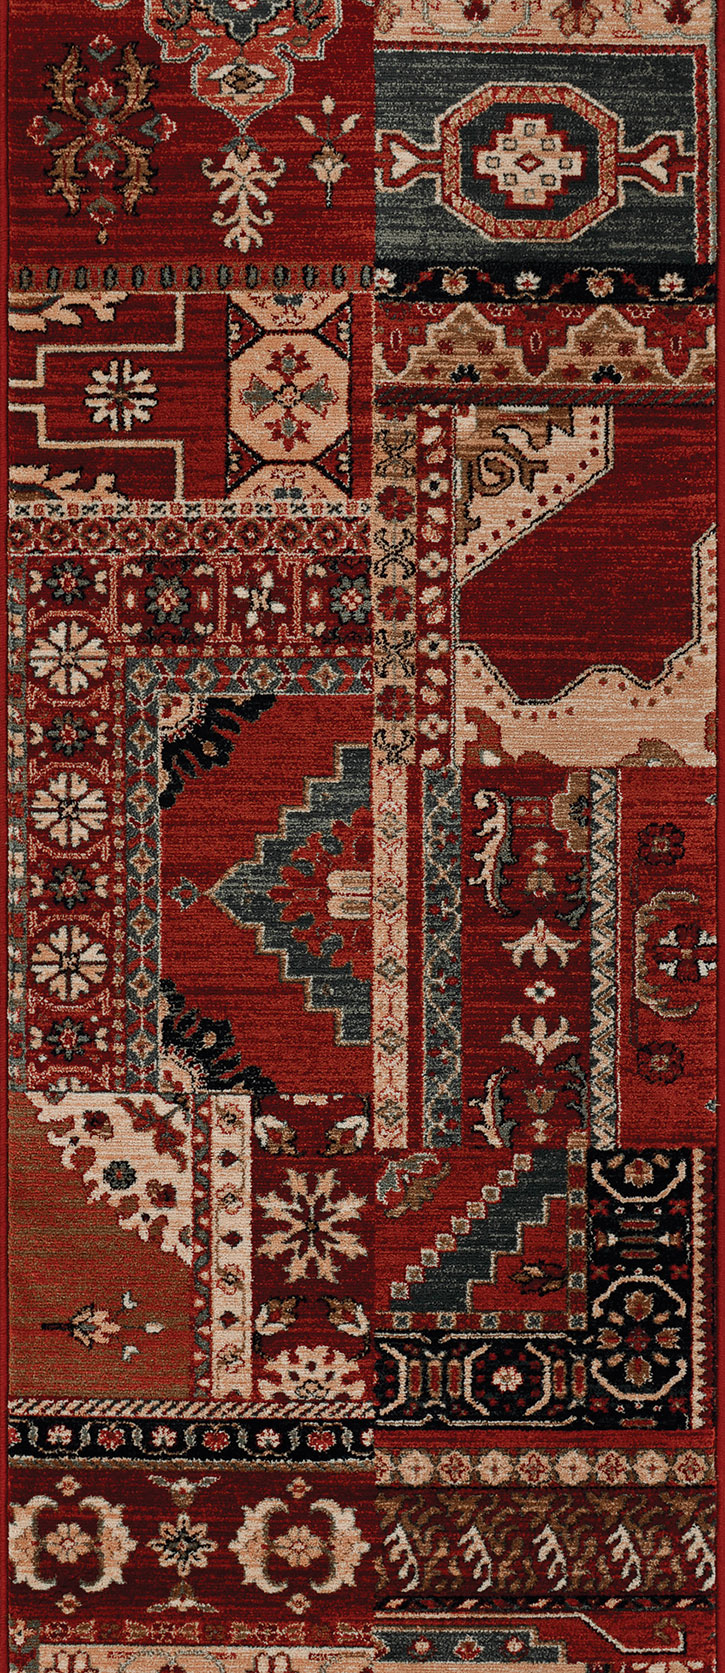 Couristan Timeless Treasures 4323-B300A Kerman Mosaic Burgundy Rust 2'7" (31") Wide Hall and Stair Runner